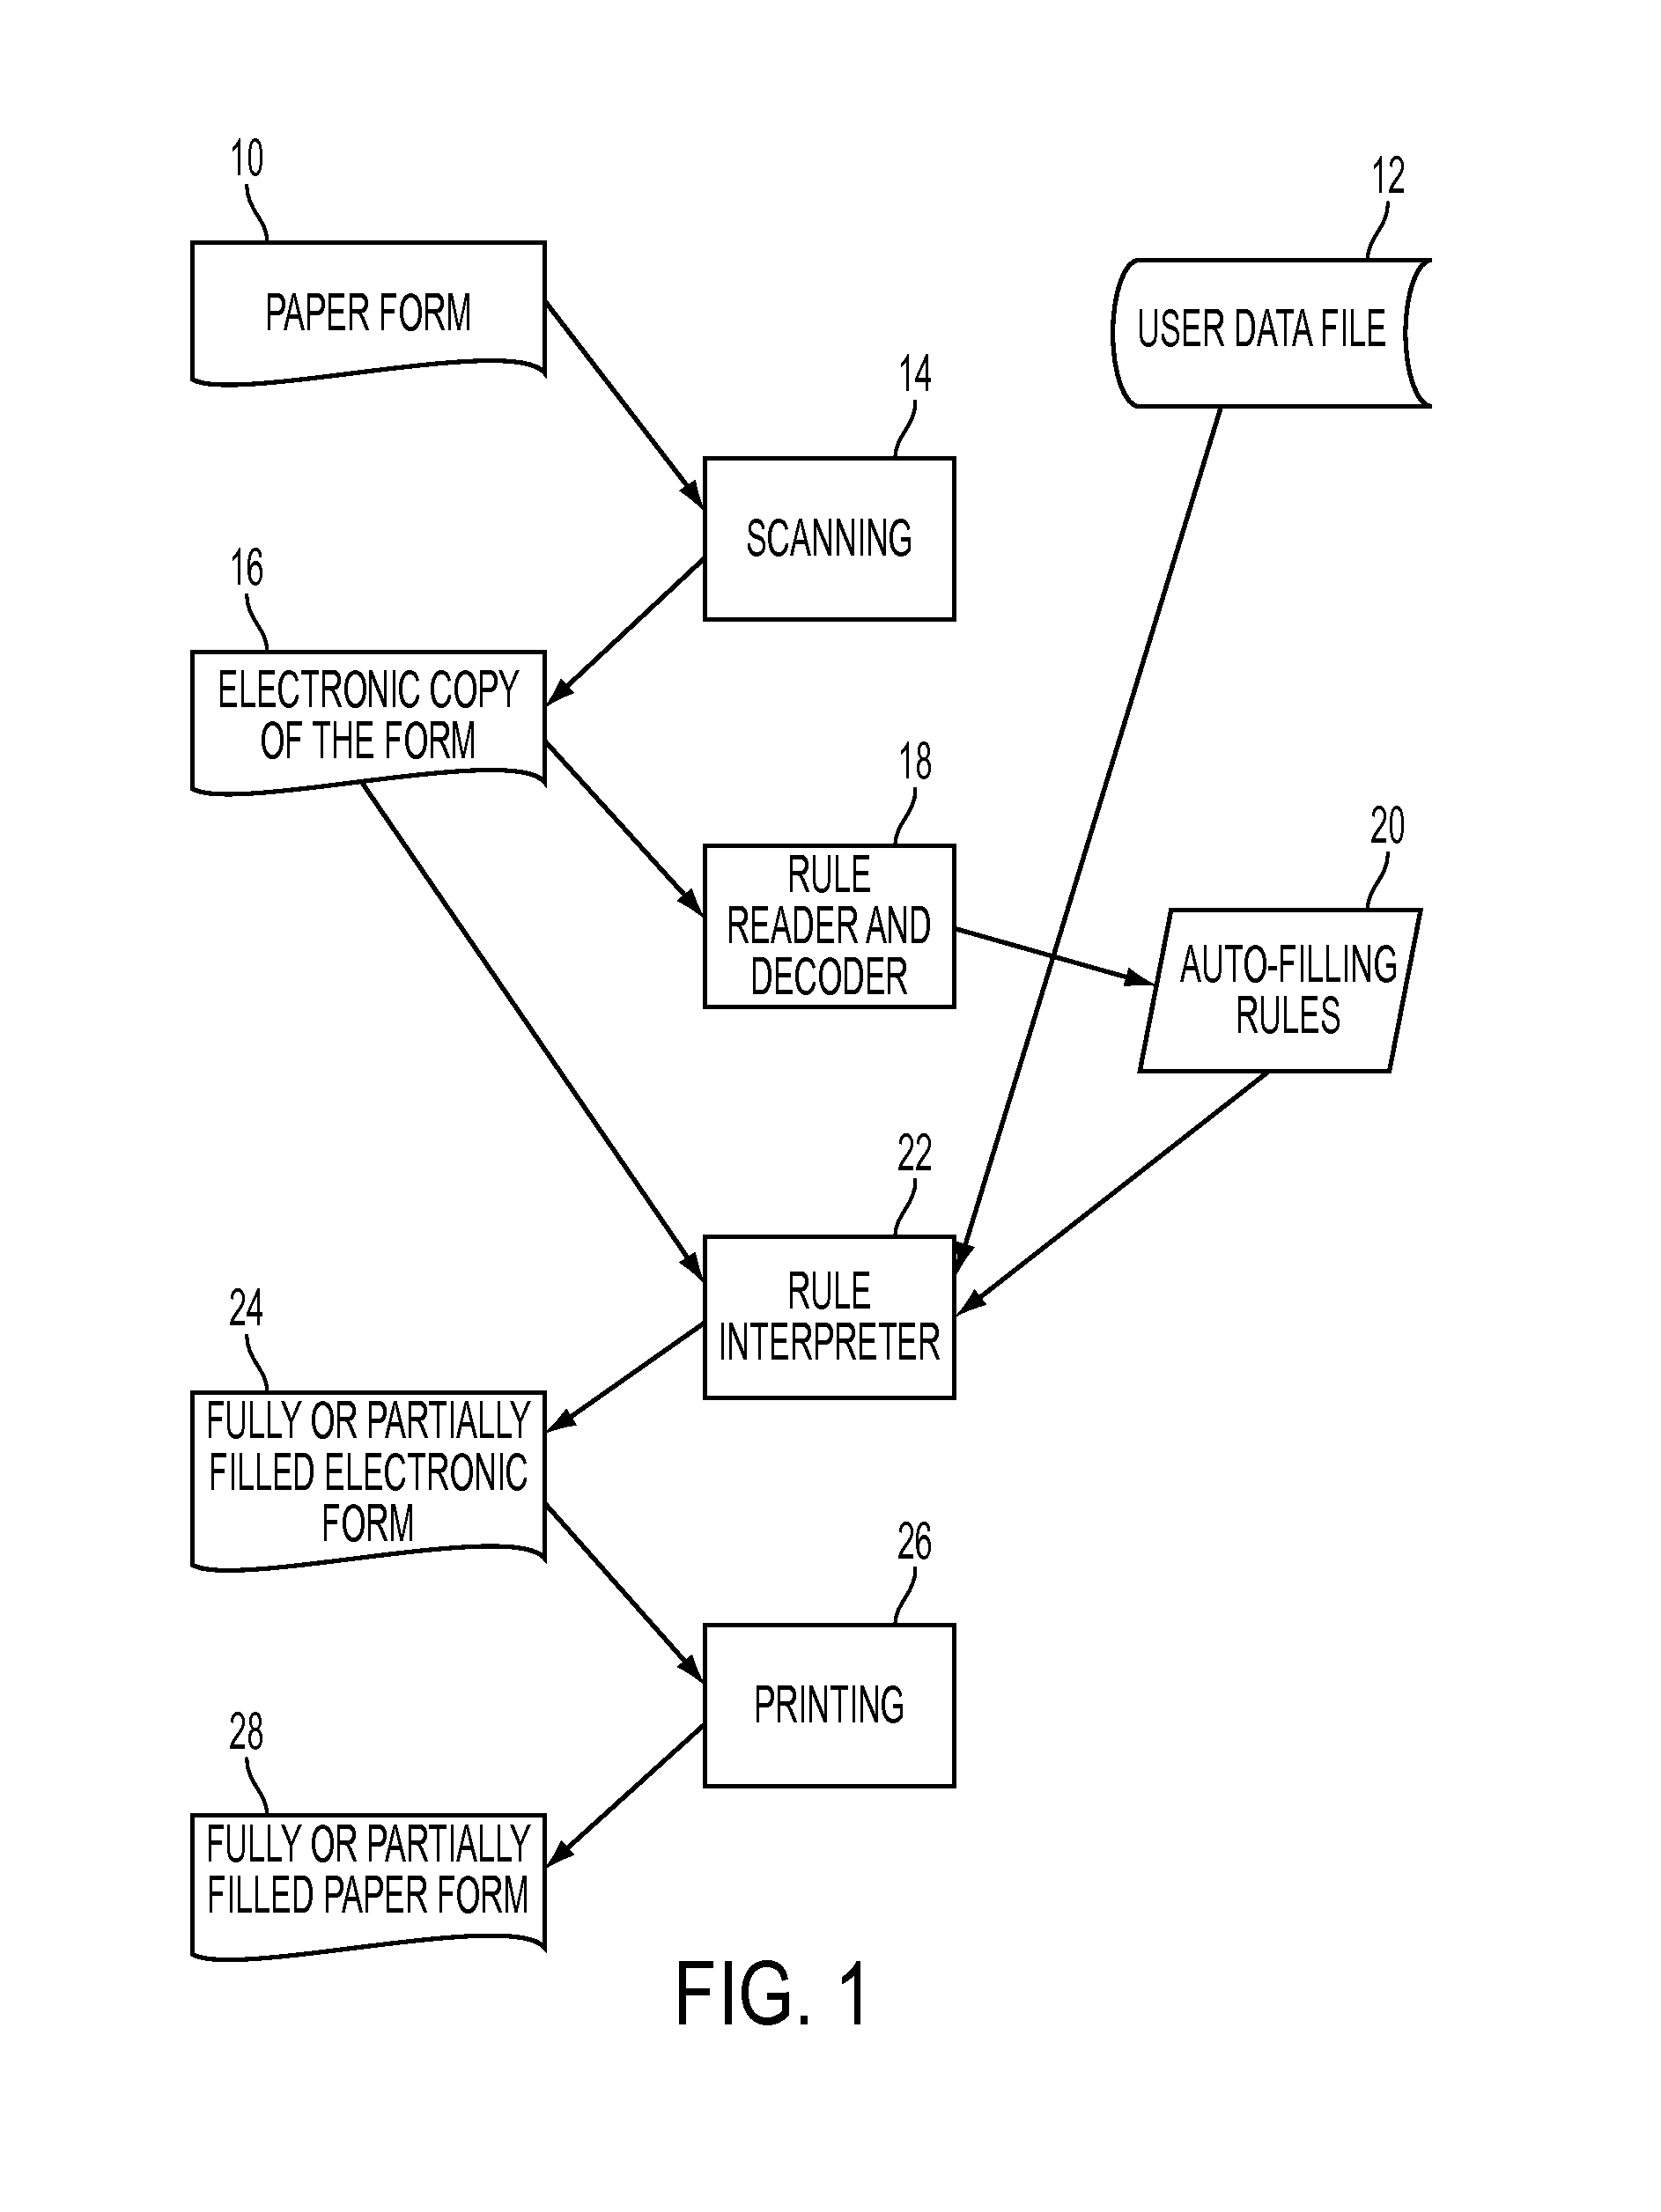 Method and apparatus for automatic filling of forms with data